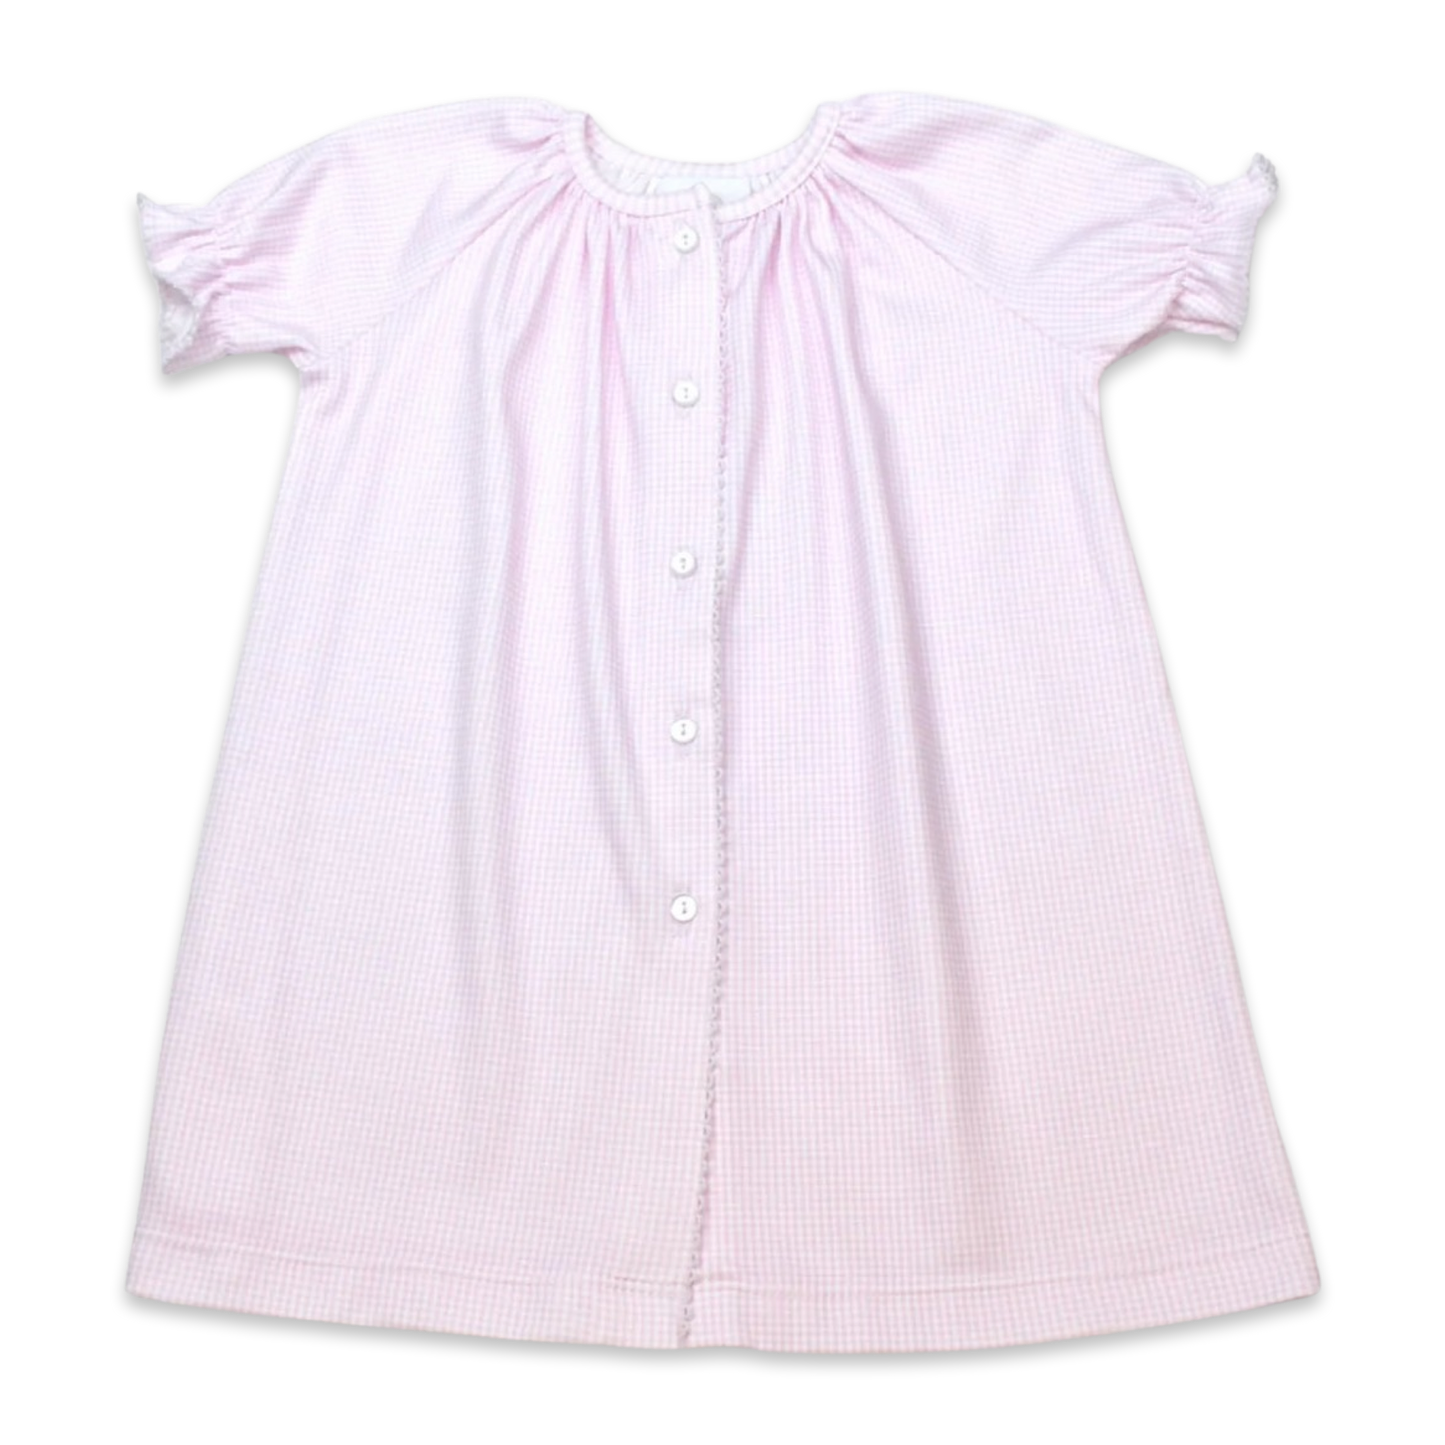 Lullaby Set Daygown - Pink Gingham